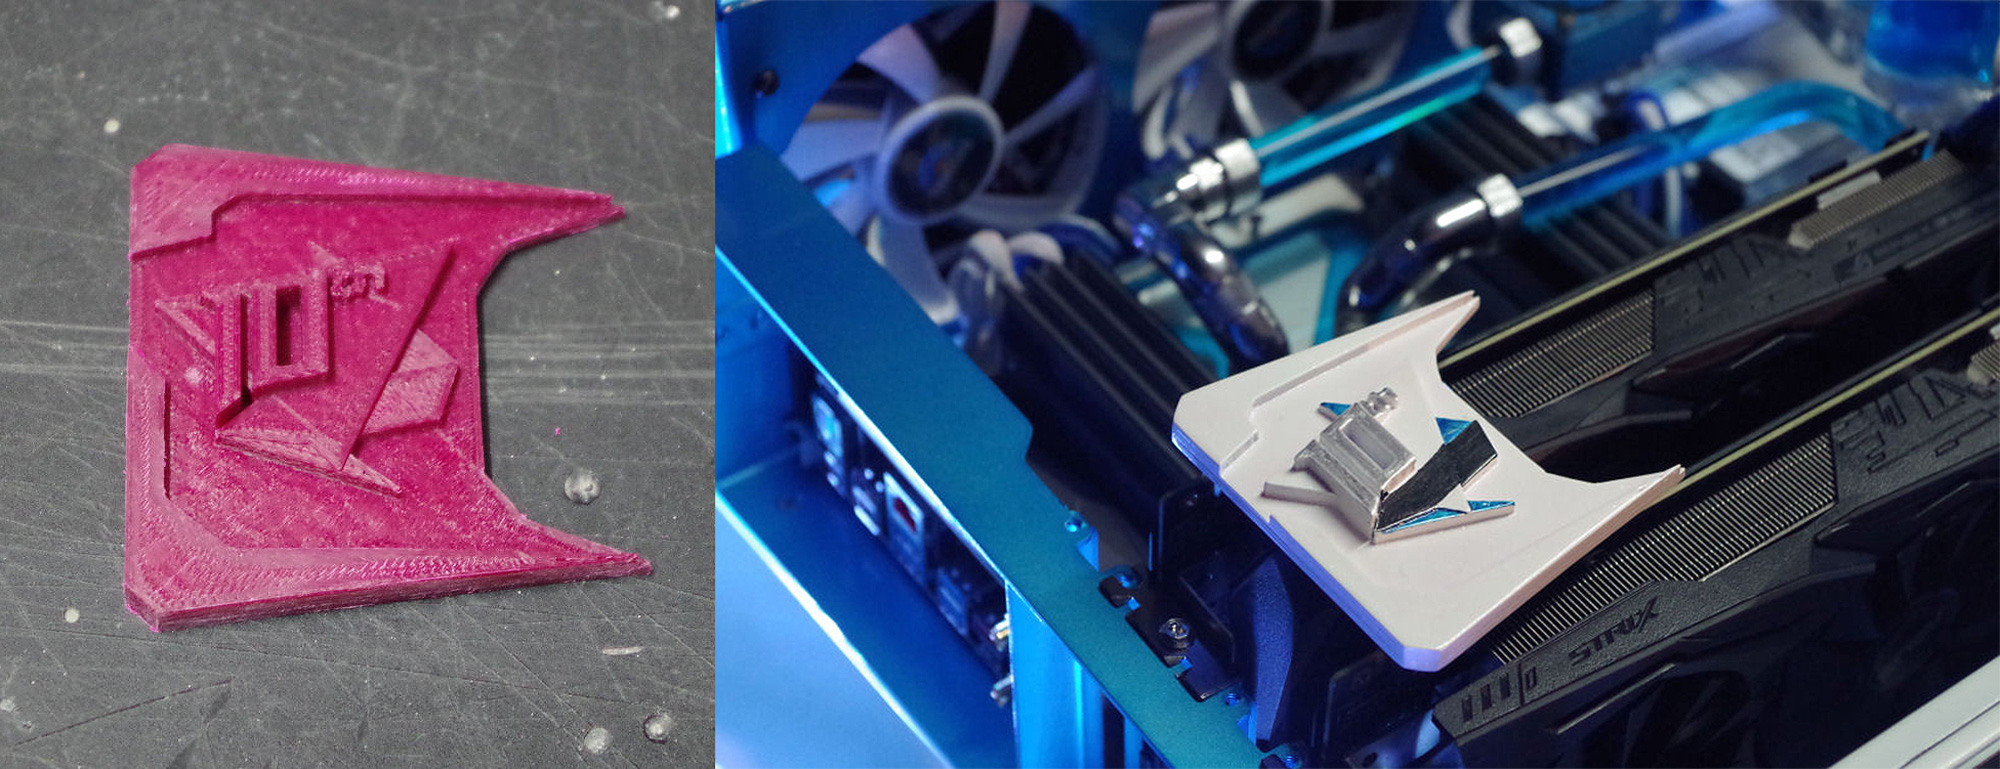 Before-and-after-SLI-Bridge